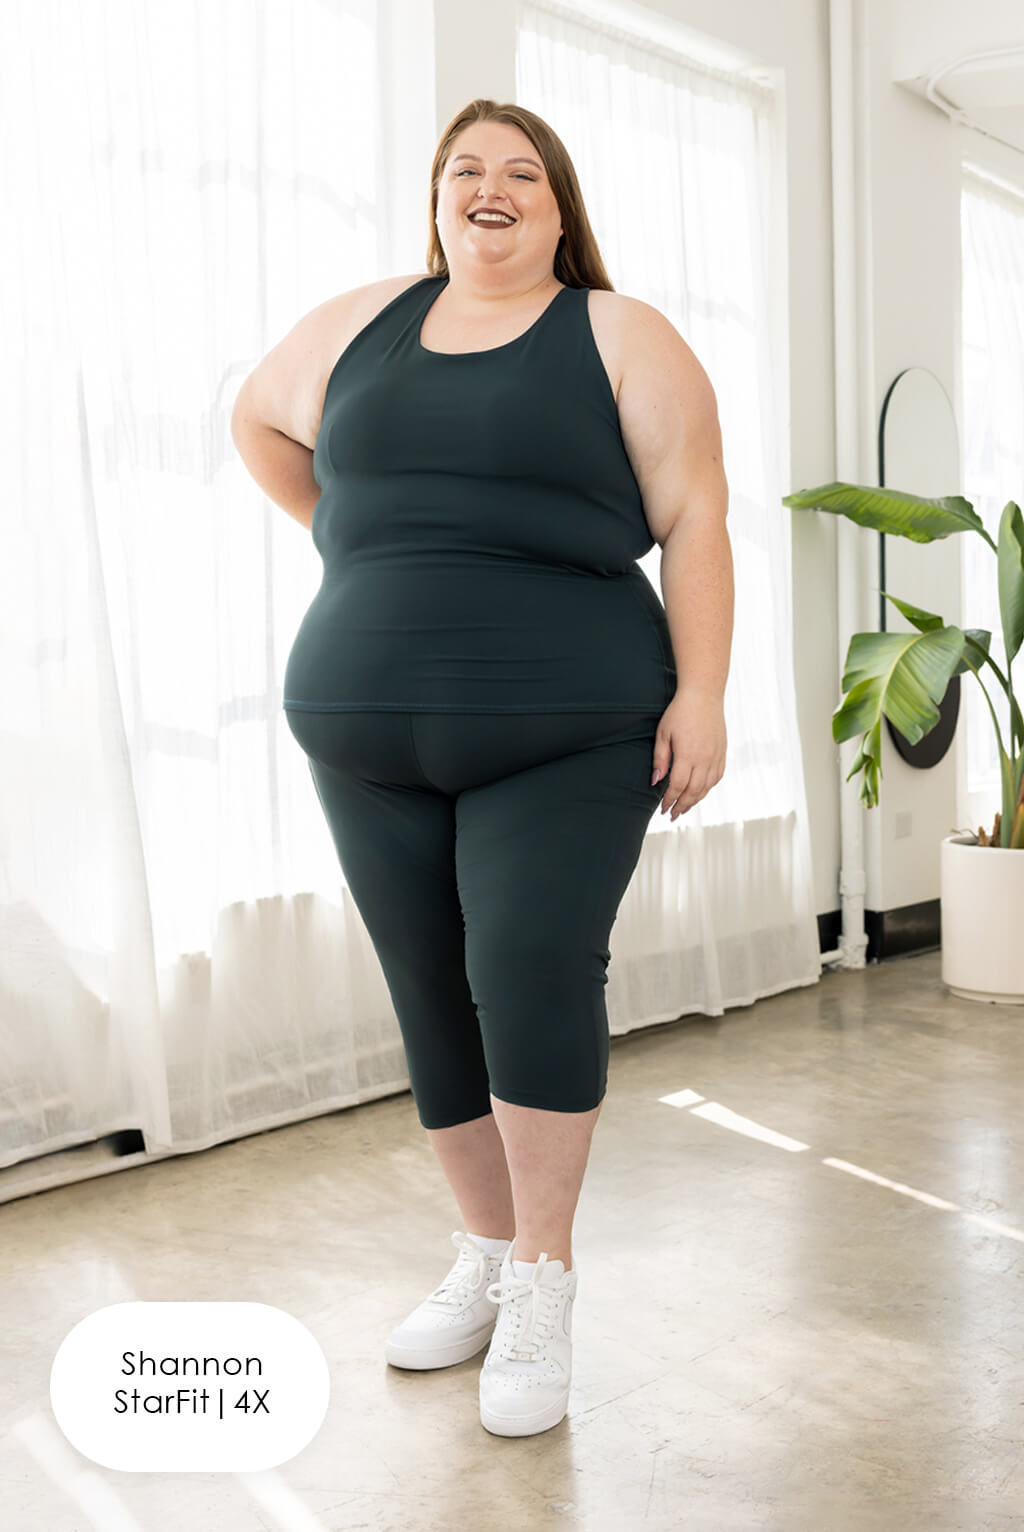 These plus size New Mix Brand peach skin capris are seamless, chic, and a  must-have for every wardrobe. These lightweight, capri leggings have a 3  waistband. They are versatile, perfect for layering